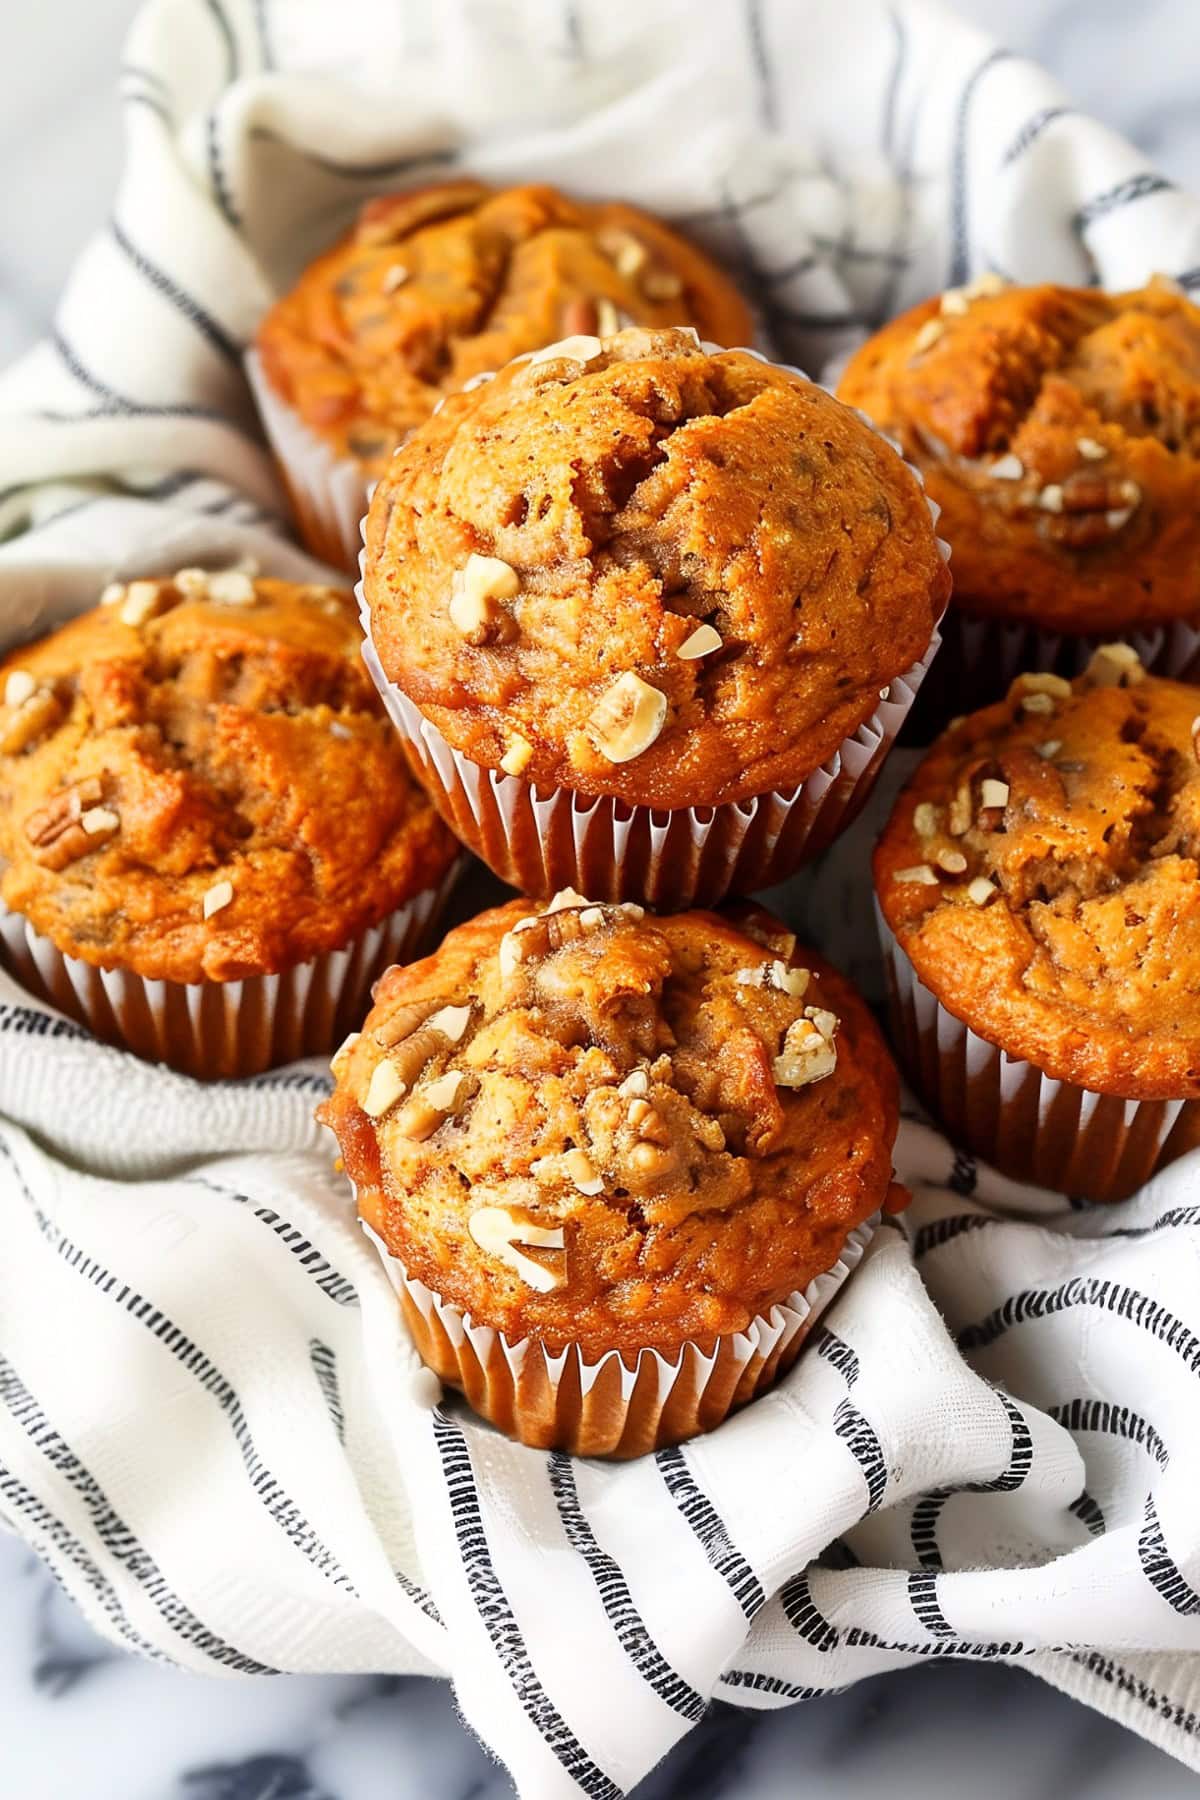 Homemade carrot muffins with cinnamon, ginger and nuts